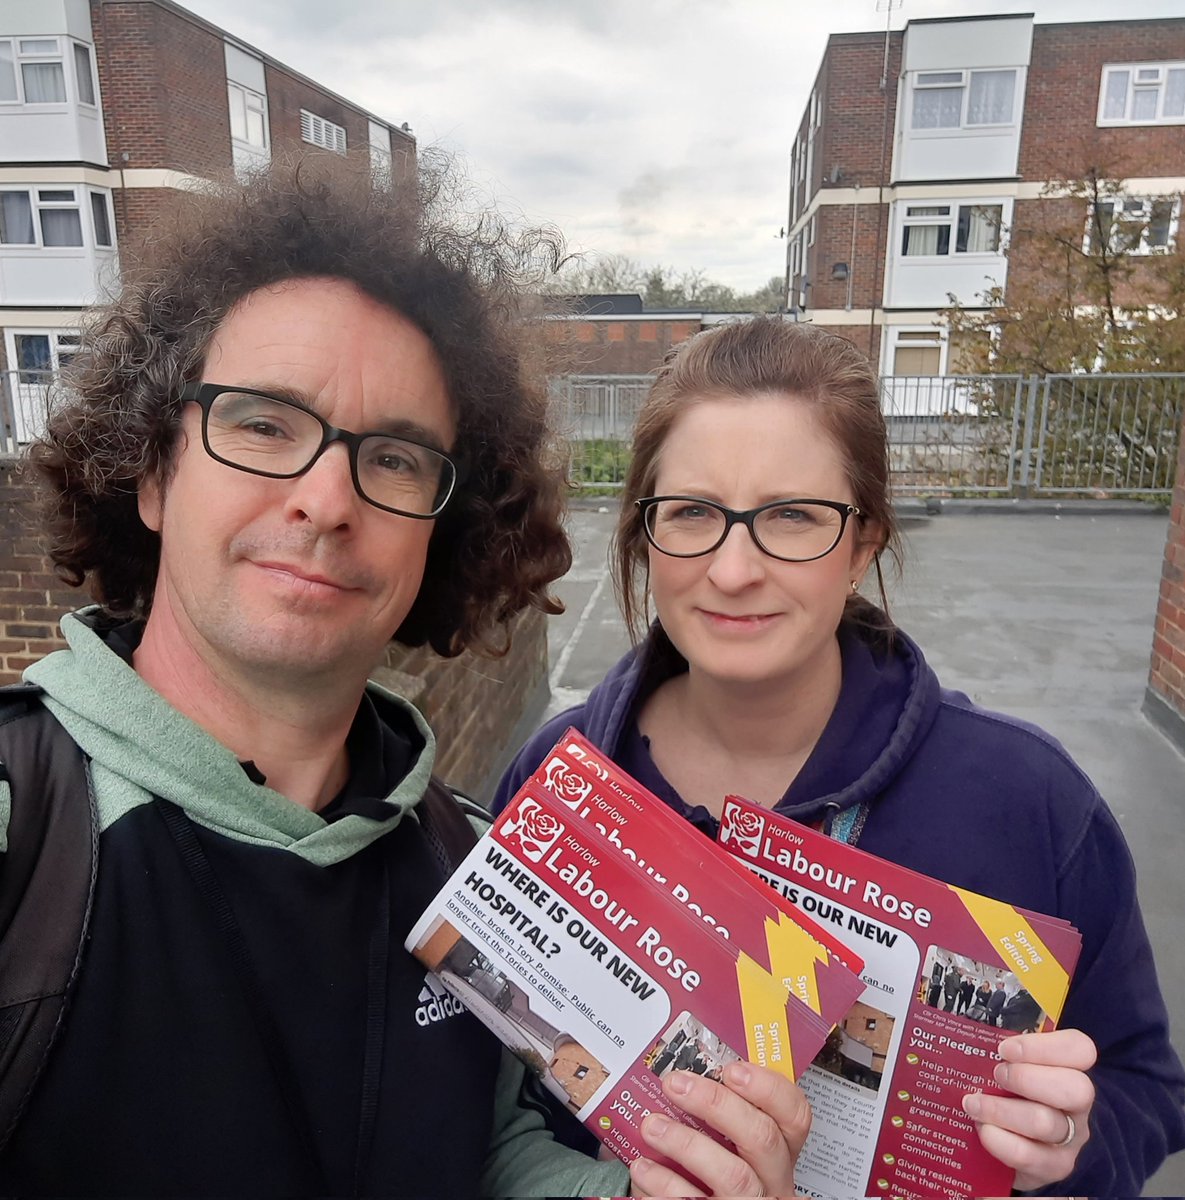 Out in Bush Fair this afternoon delivering our newsletter for the upcoming local elections, vote Labour on 4th May, only we can provide effective opposition to the Harlow Tory council of chaos #VoteLabour @HarlowLabour @CaraSheridanA